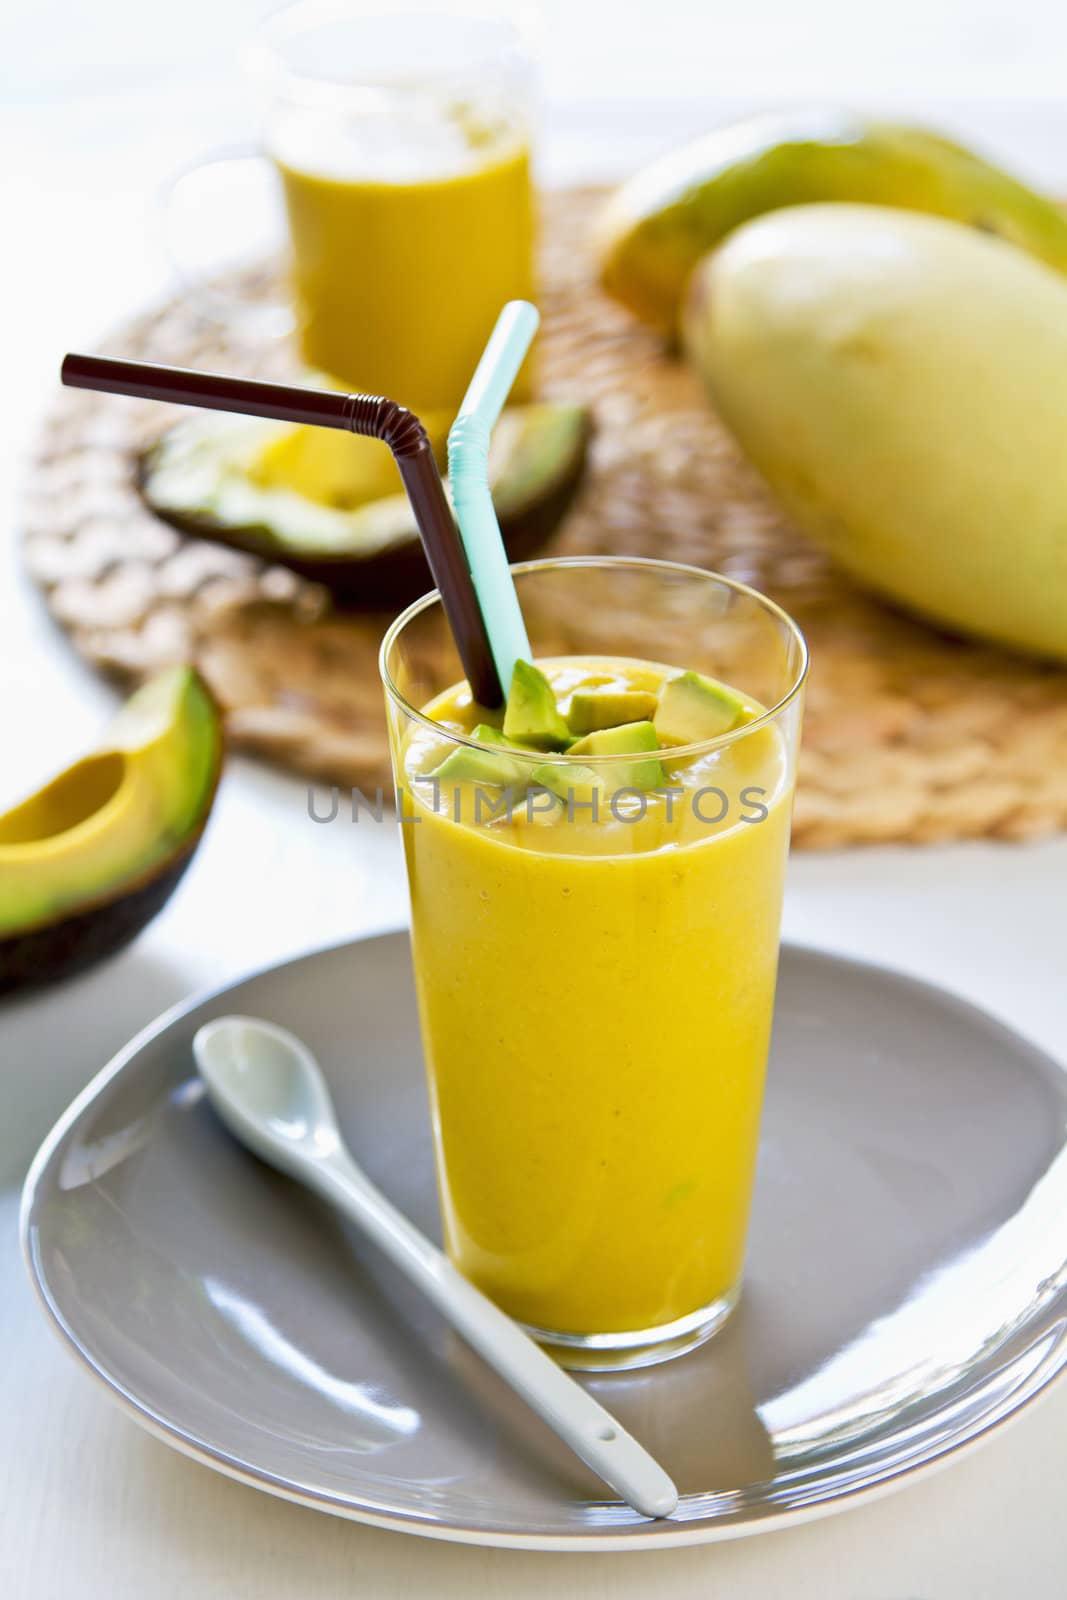 Avocado with Mango smoothie by vanillaechoes